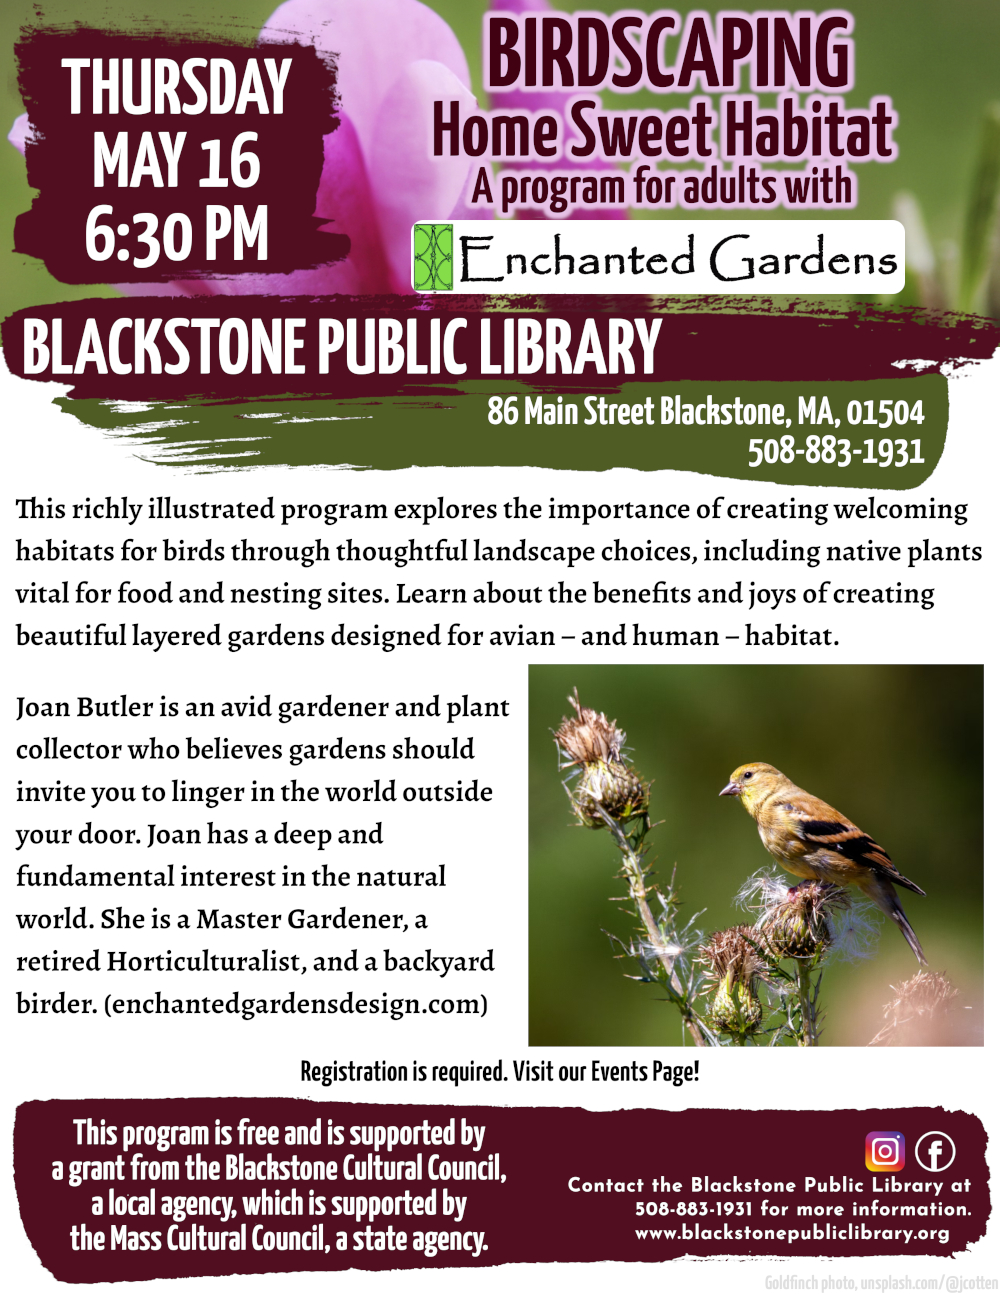 Birdscaping: Home Sweet Habitat with Enchanted Garden Designs. Thursday, May 16, 6:30 PM.  This richly illustrated program explores the importance of creating welcoming habitats for birds through thoughtful landscape choices, including native plants vital for food and nesting sites. Learn about the benefits and joys of creating beautiful layered gardens designed for avian – and human – habitat.  Joan Butler is an avid gardener and plant collector who believes gardens should invite you to linger in the world outside your door. Joan has a deep and fundamental interest in the natural world. She is a Master Gardener, a retired Horticulturalist, and a backyard birder. (enchantedgardensdesign.com)  Registration is required. Visit our Events Page!  This program is free and is supported by a grant from the Blackstone Cultural Council, a local agency, which is supported by the Mass Cultural Council, a state agency.